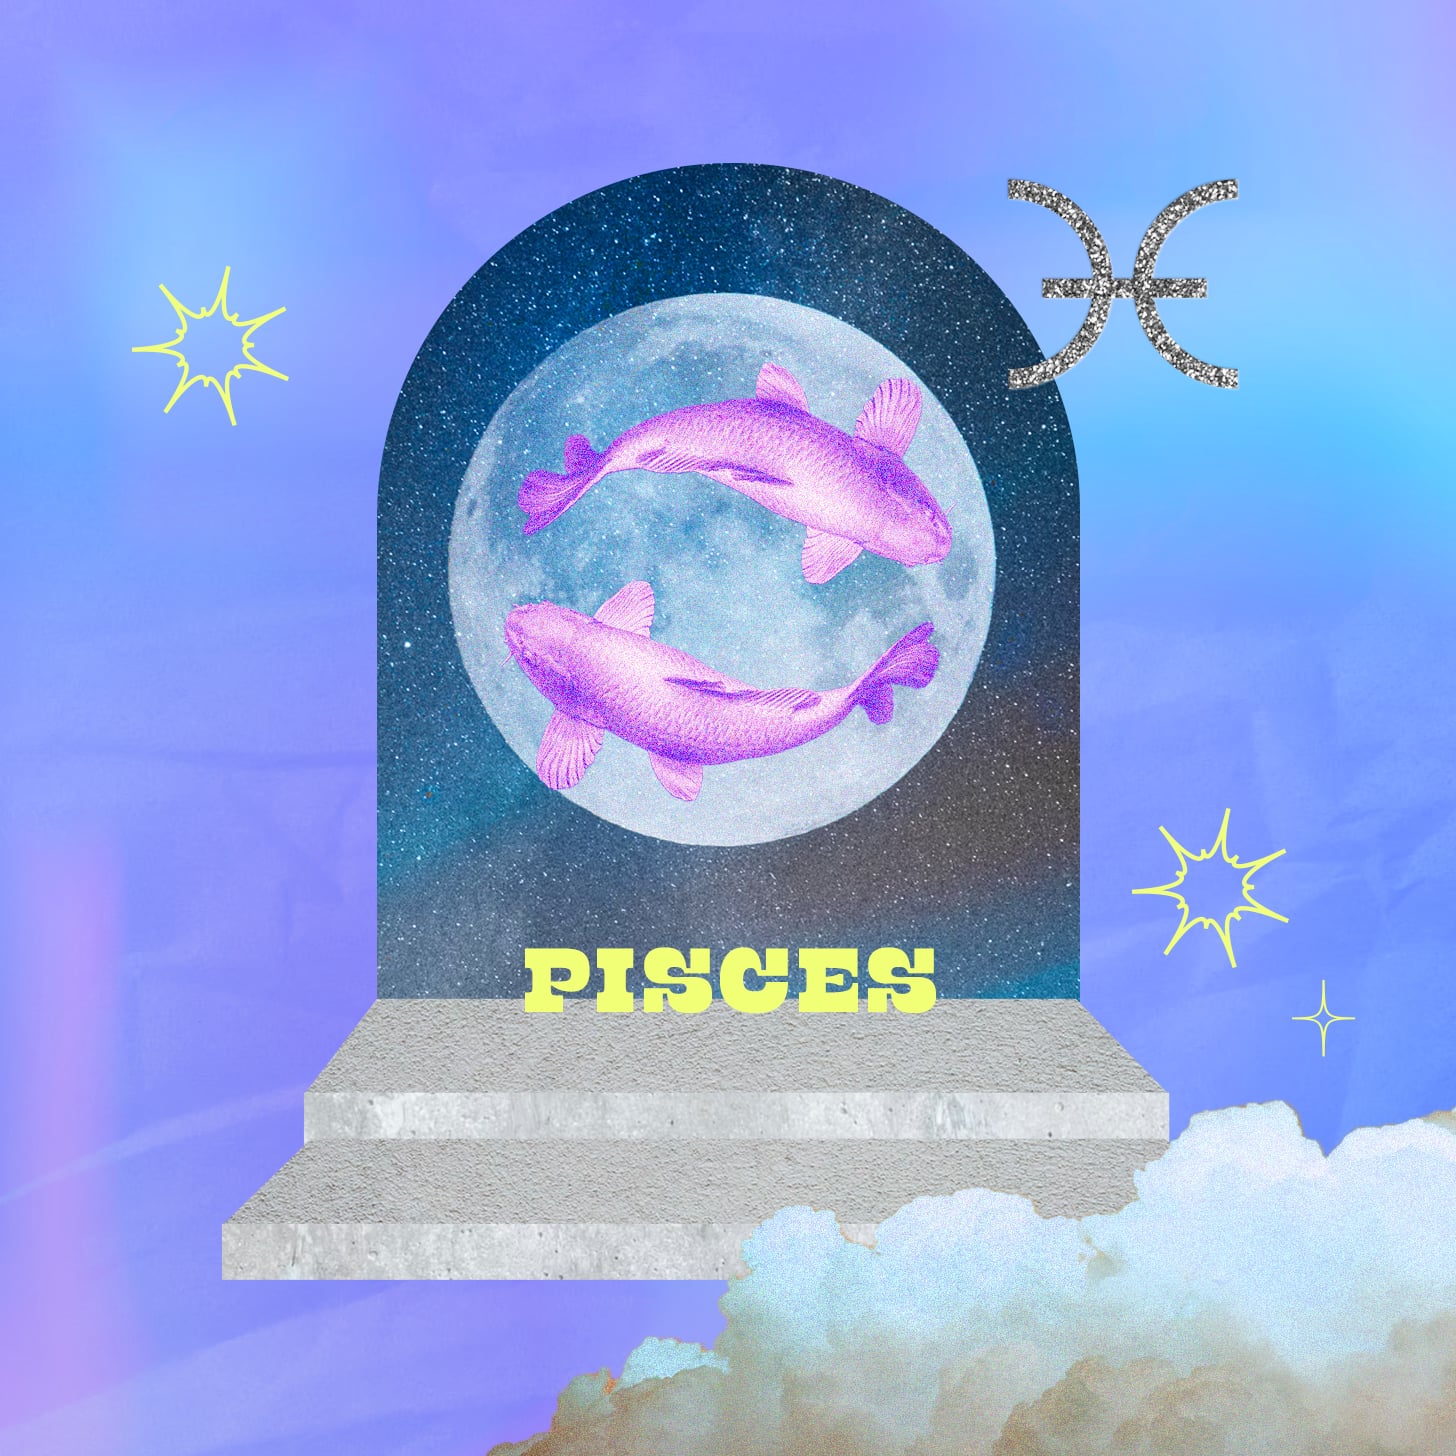 PIsces weekly horoscope for December 11, 2022